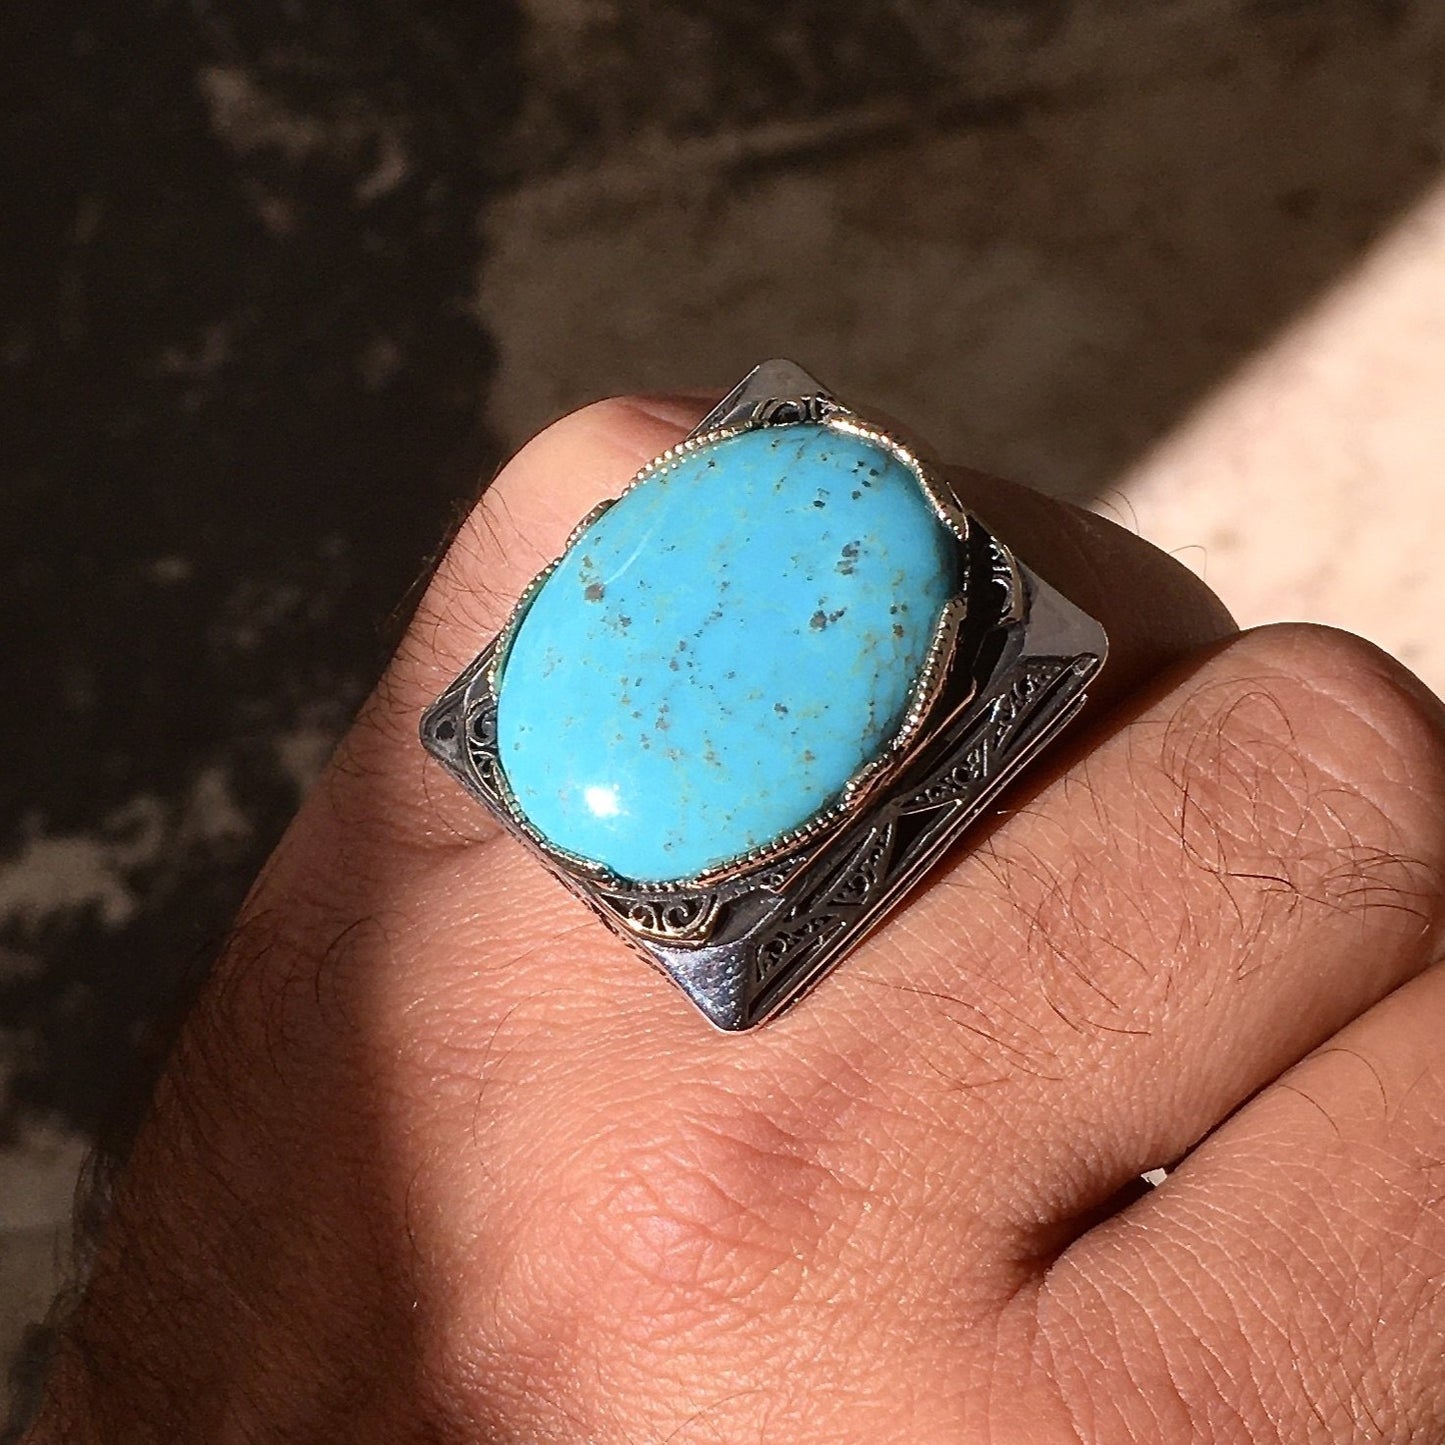 Big Men's Ring Turquoise Sterling Silver 925 Unique Statement Jewelry Large Heavy